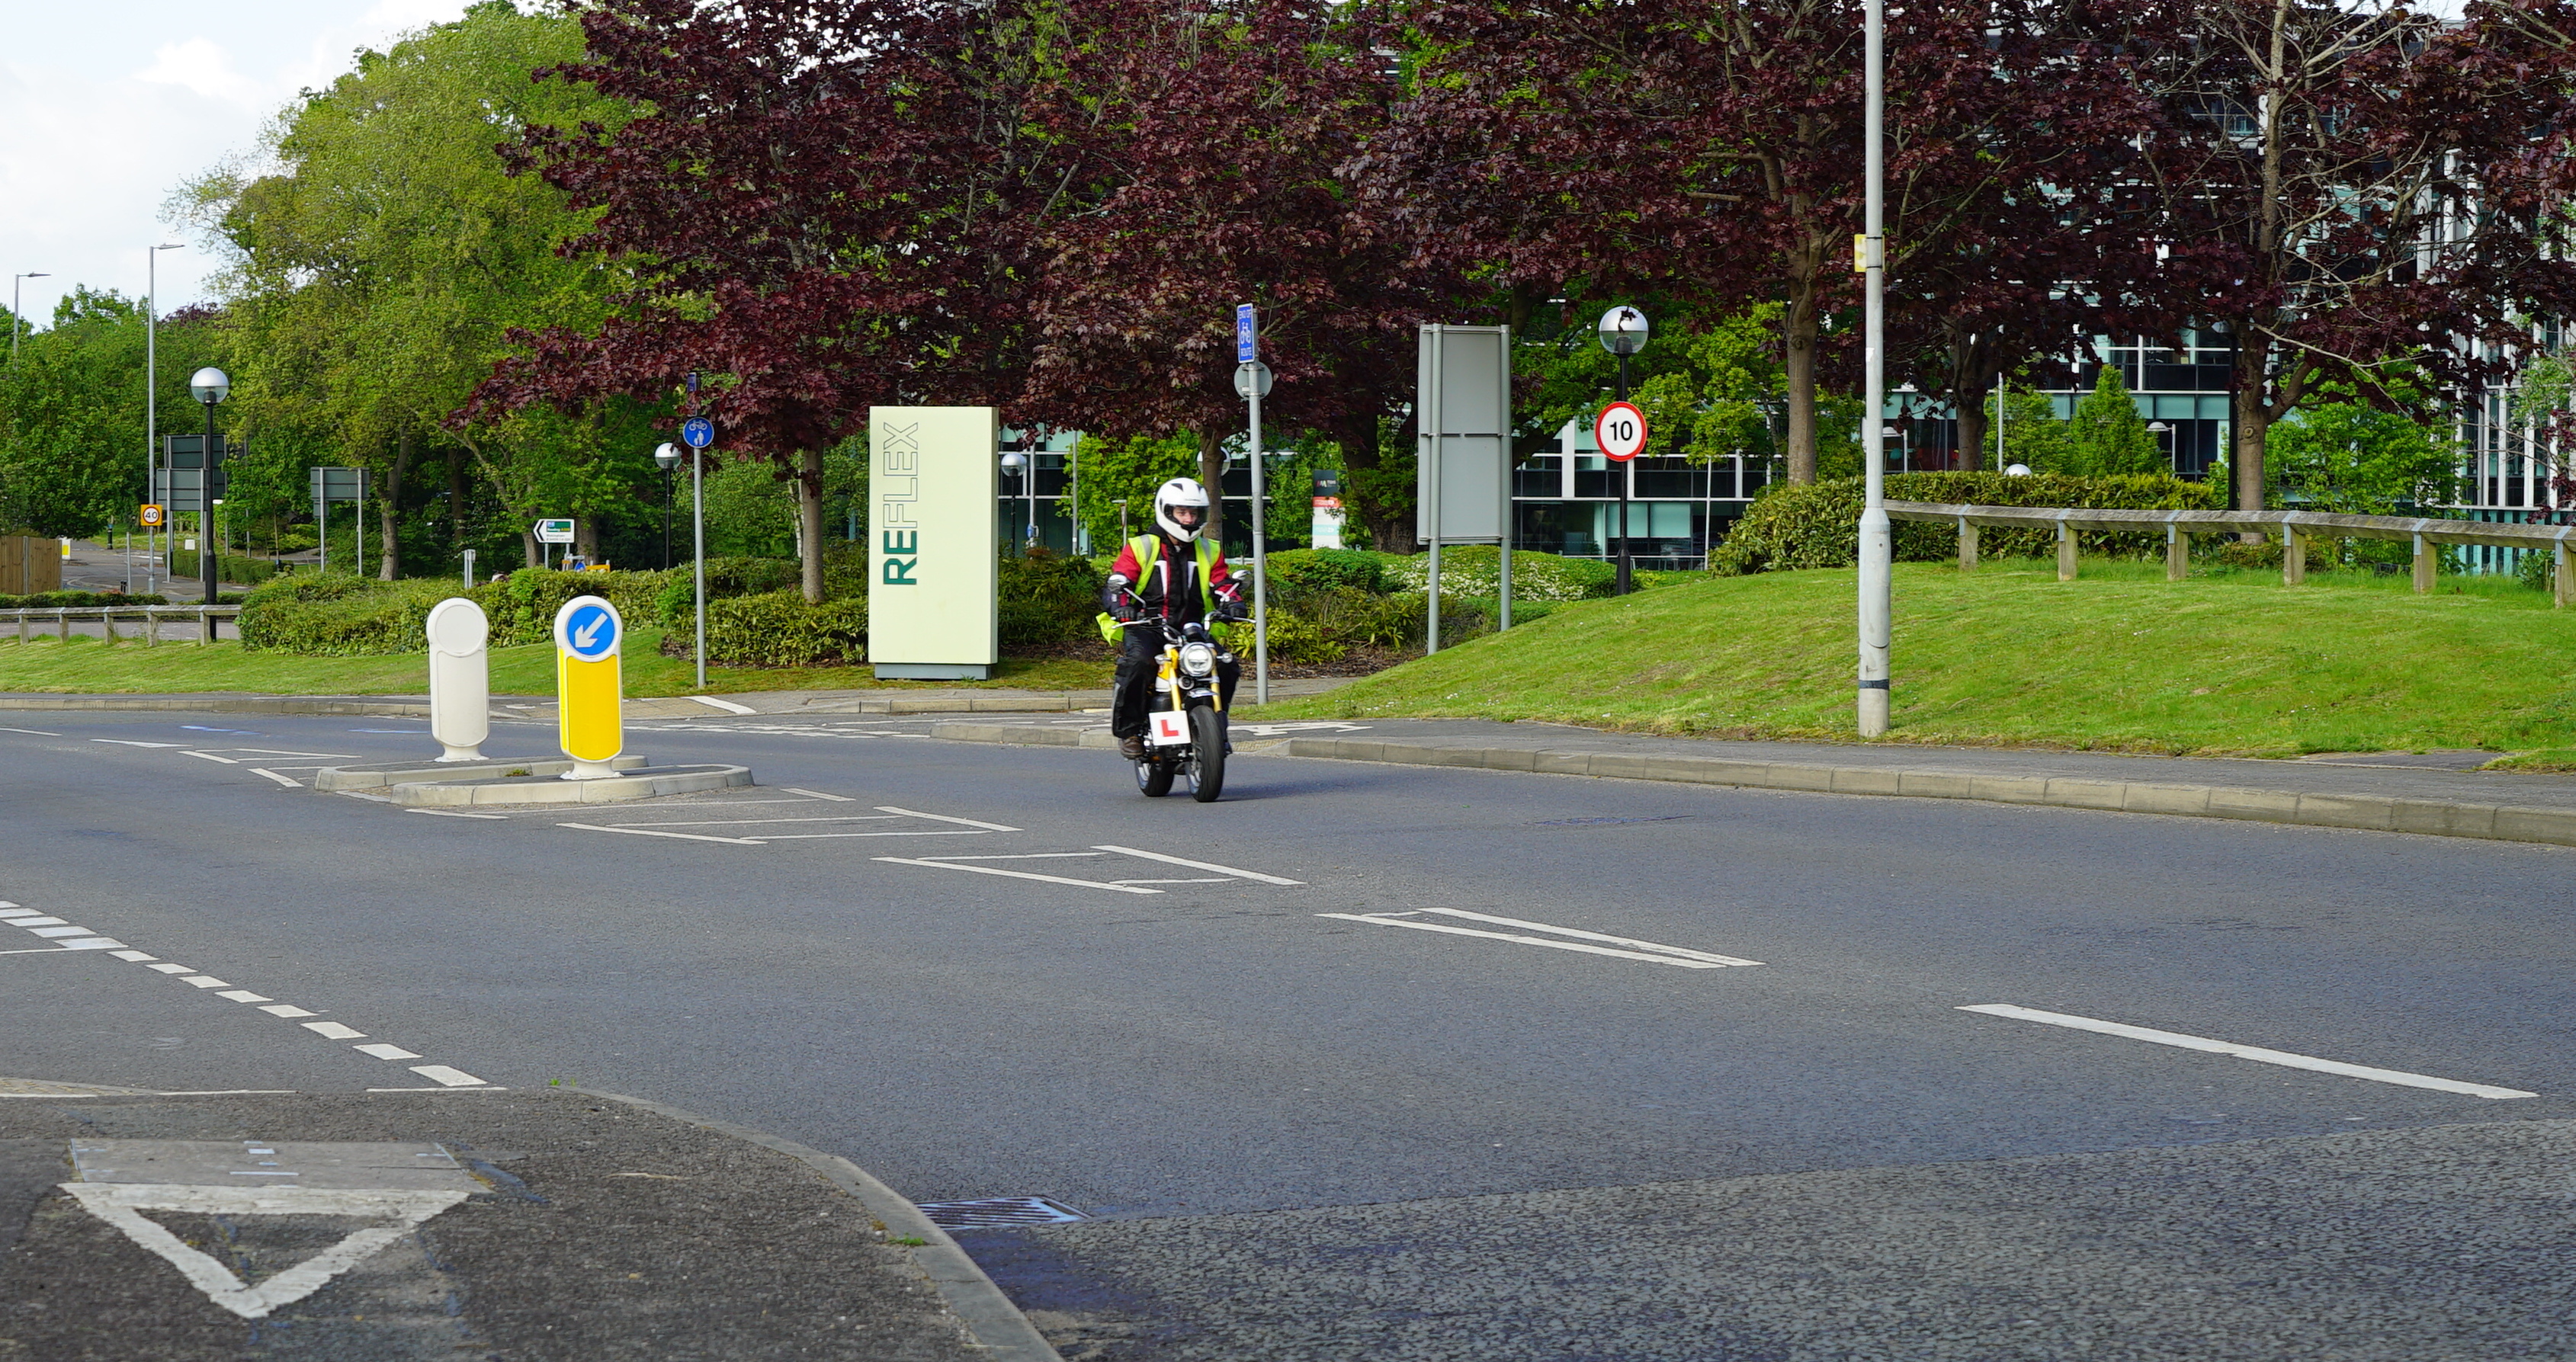 The CBT includes a large section of road driving